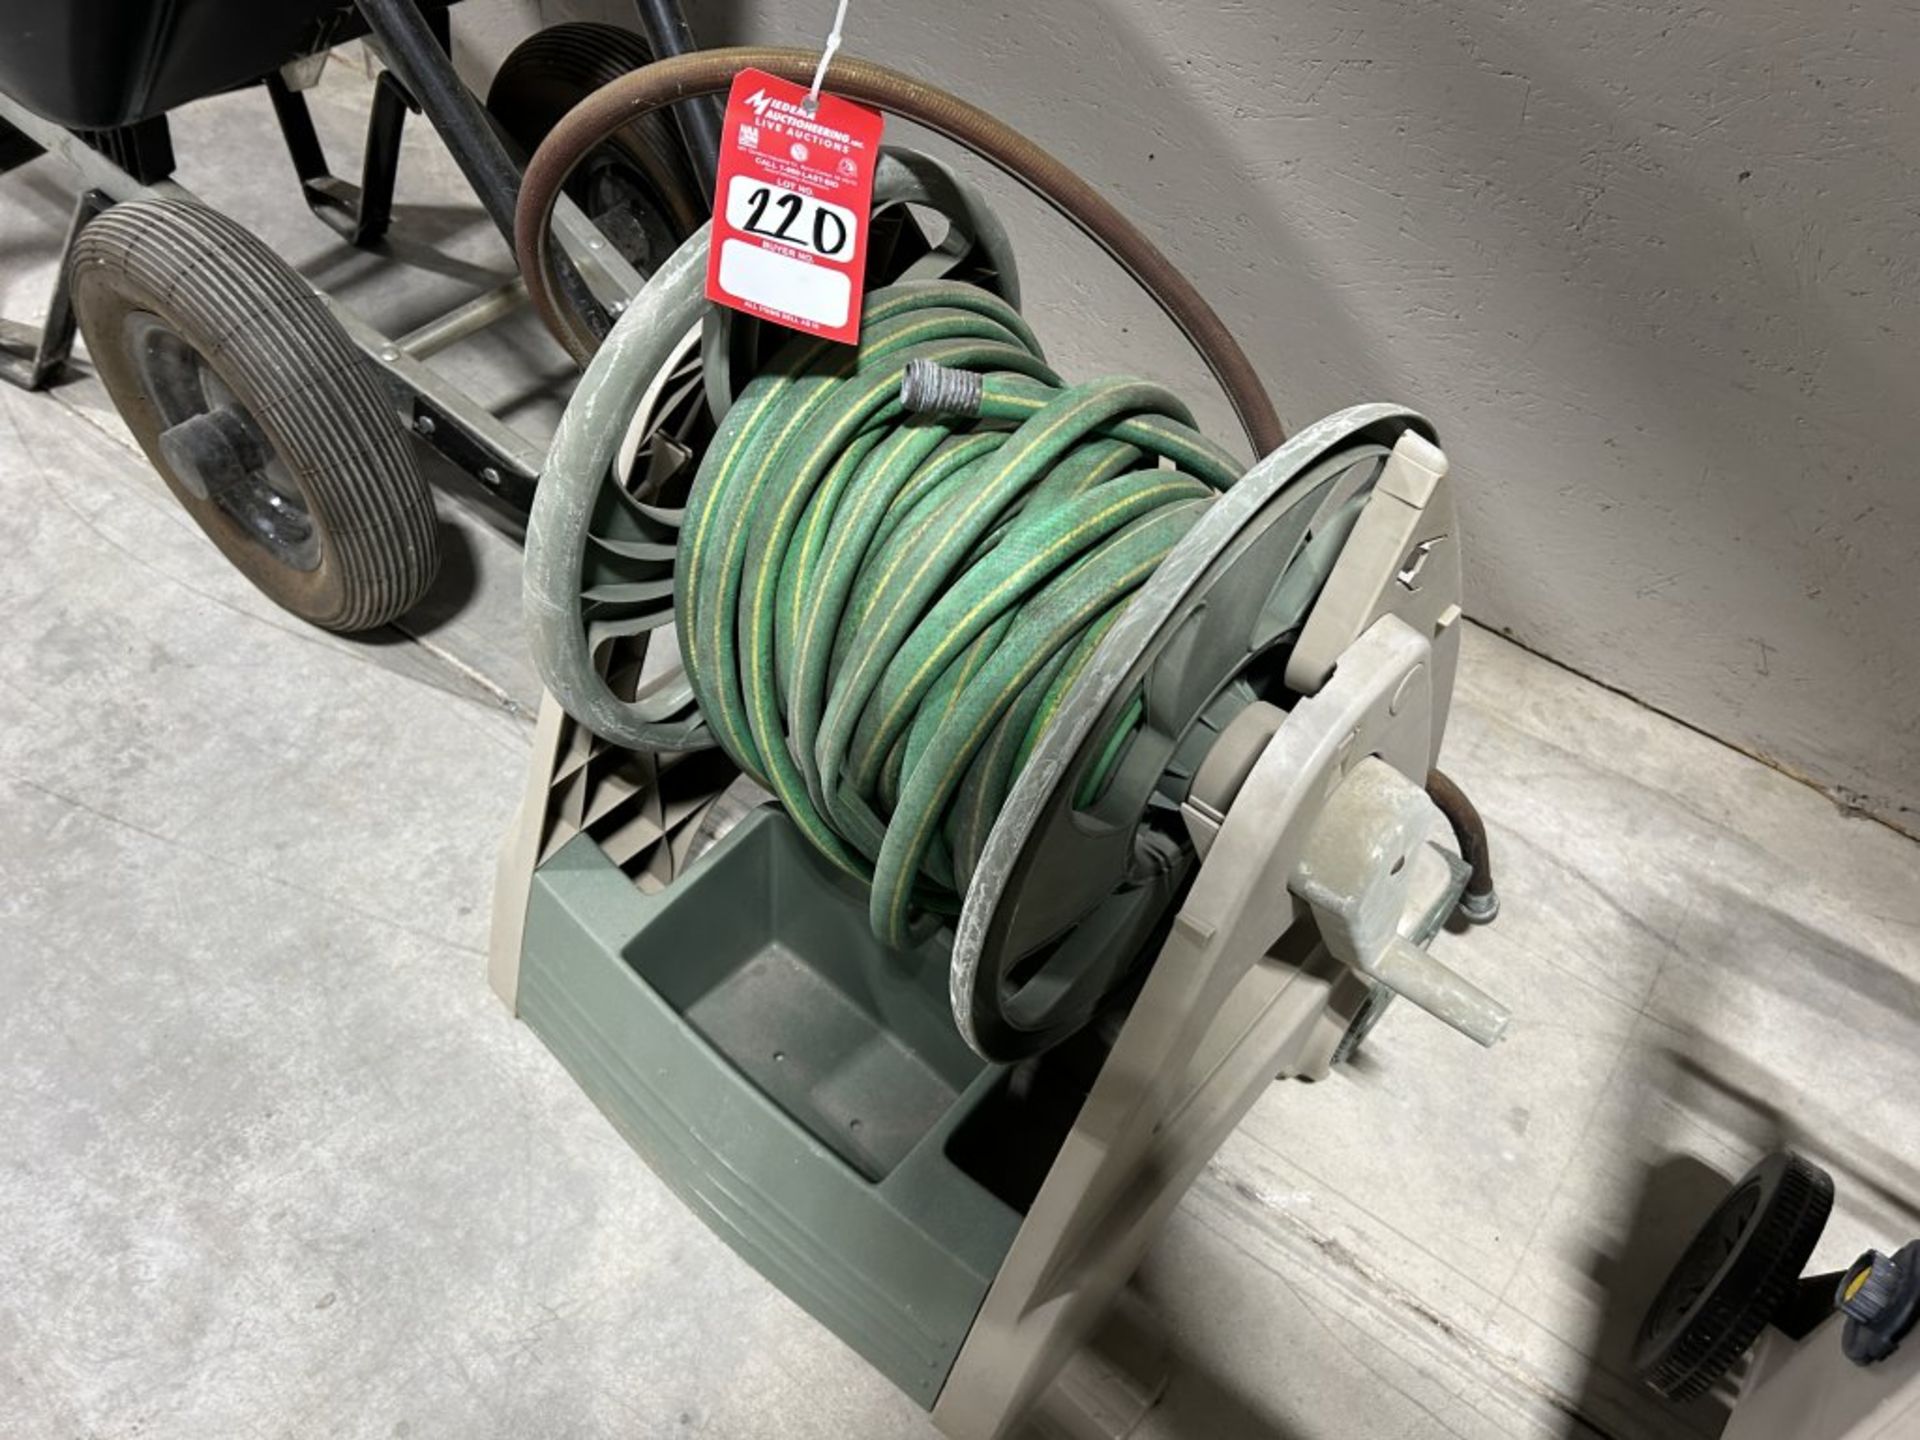 ASSORTED WATER HOSES AND HOSE REEL - Image 2 of 5